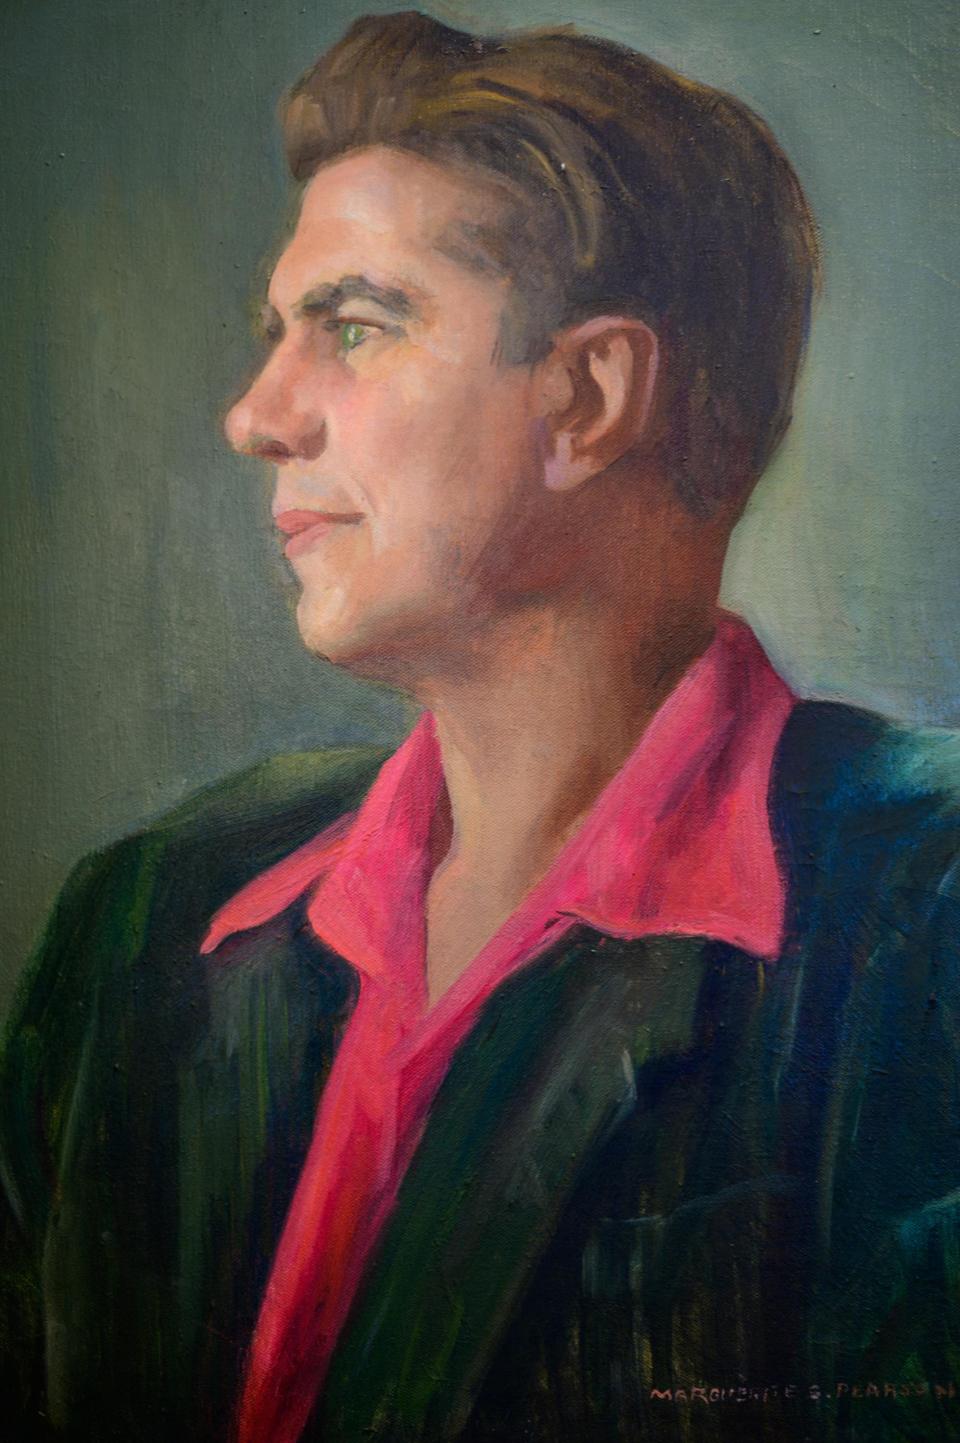 A portrait of Kenneth Worcester Dow hangs in the lobby of The  Collector Luxury Inn & Gardens on Cordova Street in St. Augustine. Dow, who died in 2002 at the age of 90, was the former owner of the property and collected many of the antiques that decorated the museum.